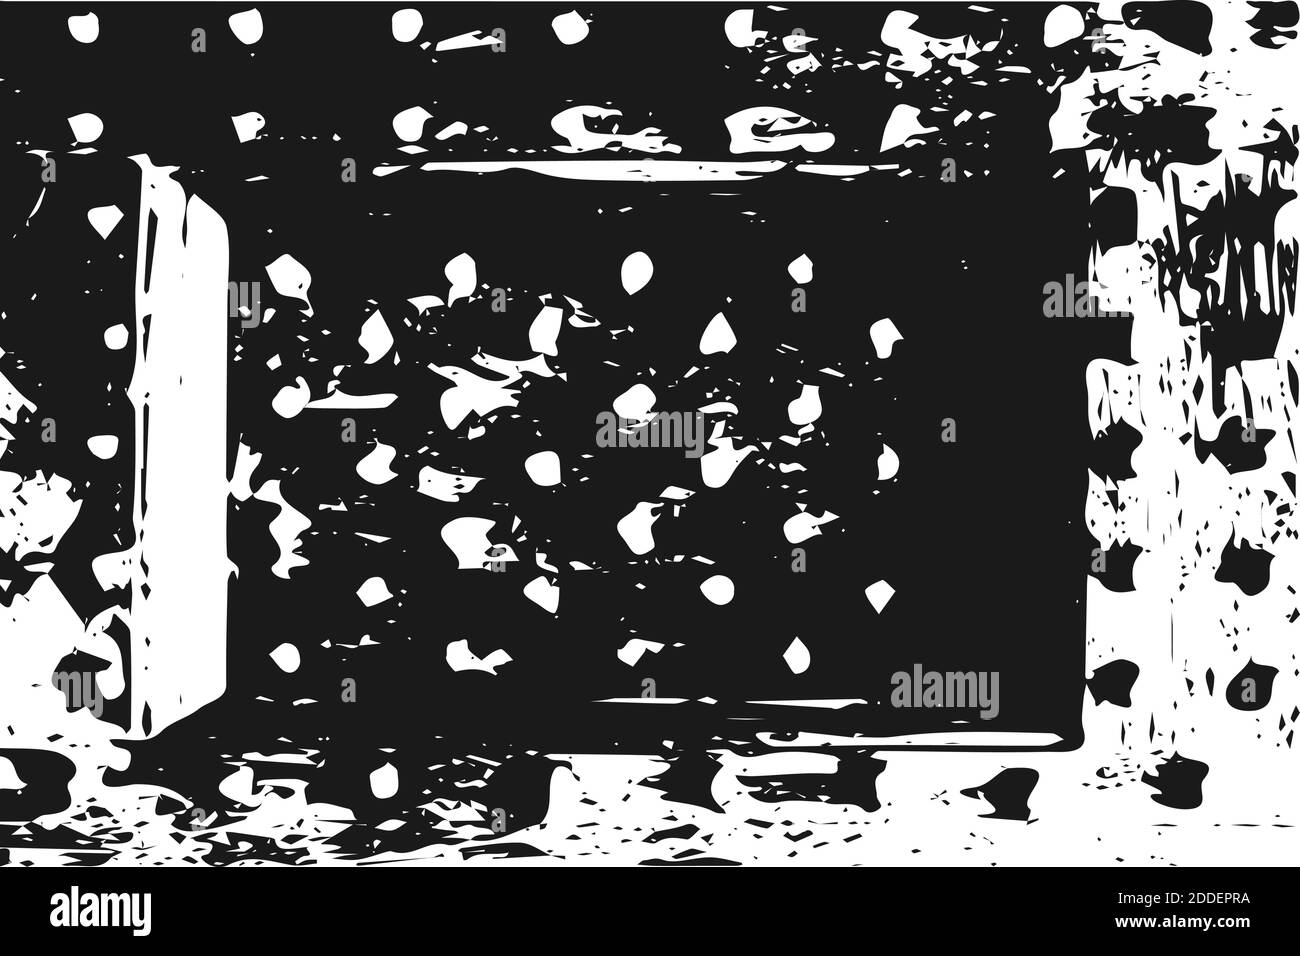 A monochrome abstract image drawn by hand.  Stock Vector